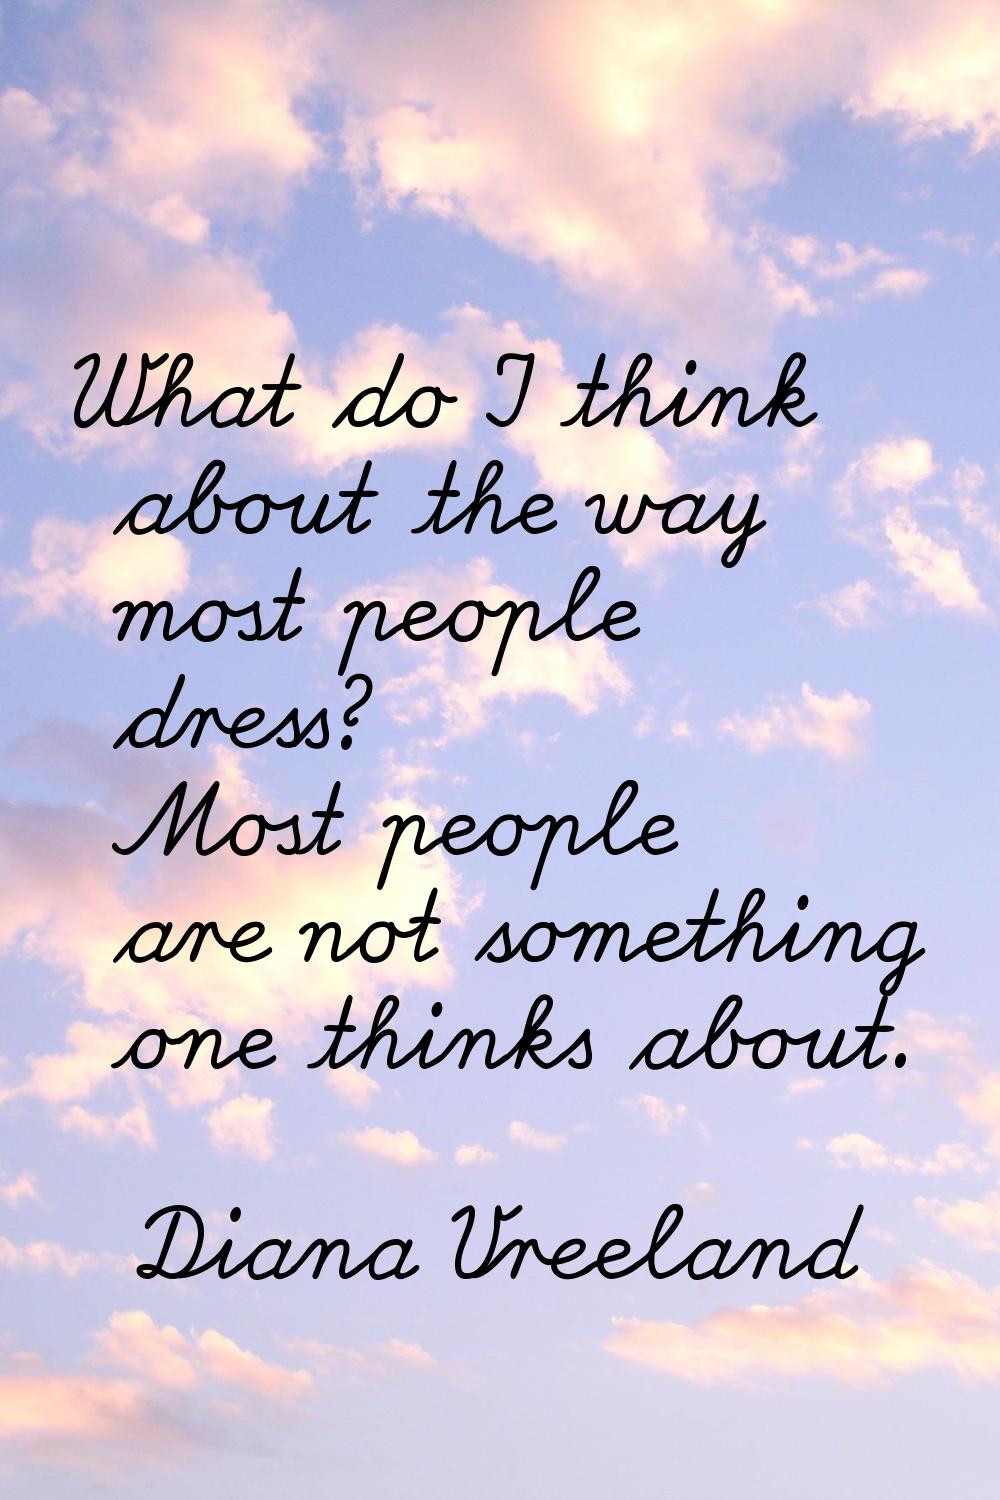 What do I think about the way most people dress? Most people are not something one thinks about.